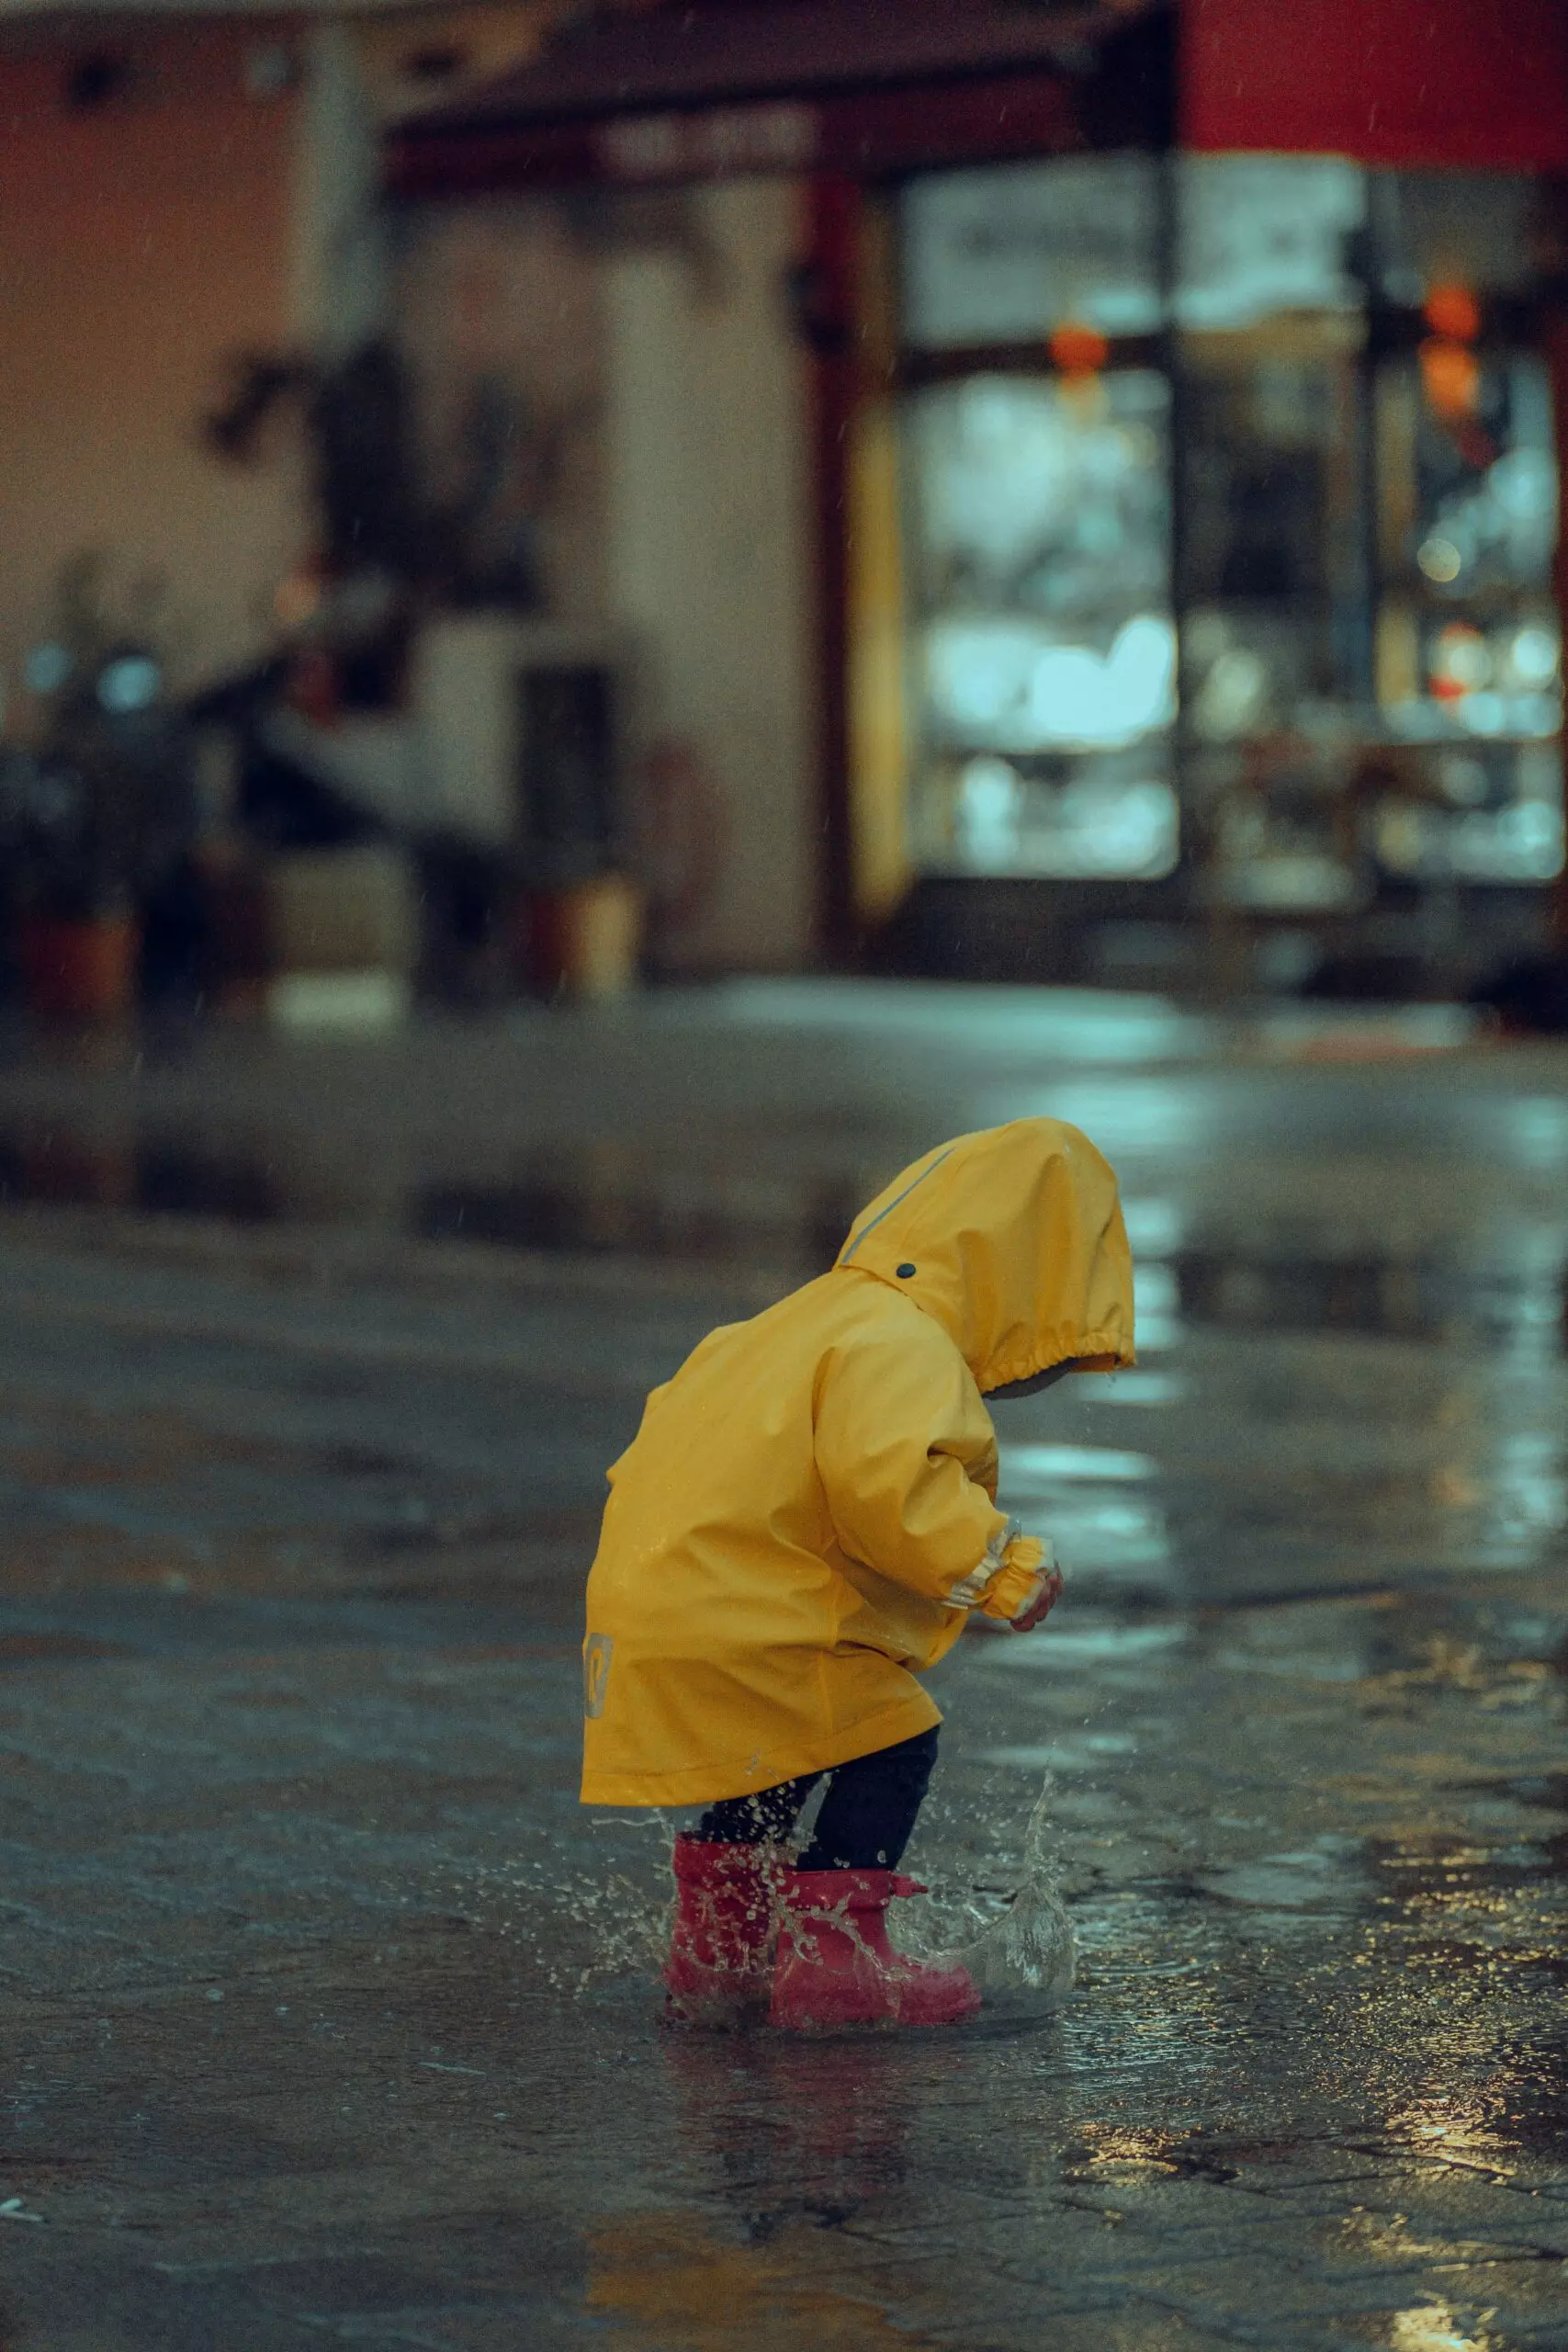 A baby who wear of the yellow raincoat look at the ground.